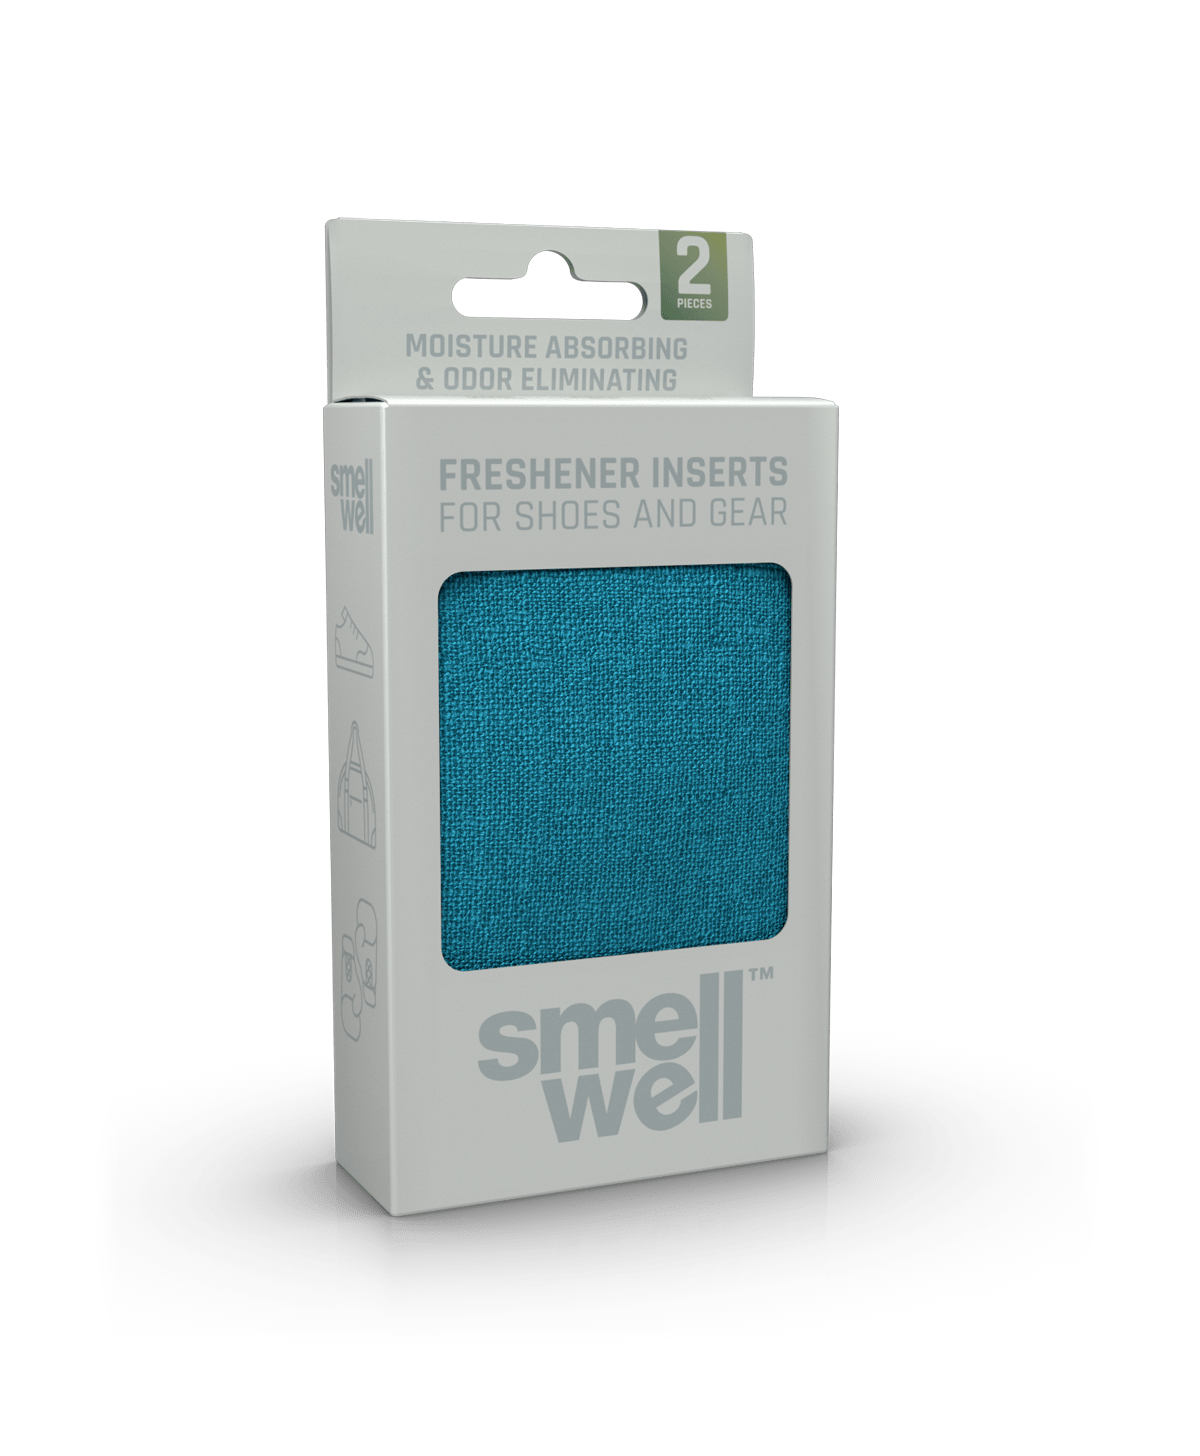 A package of SmellWell Sensitive - Blue from an angle